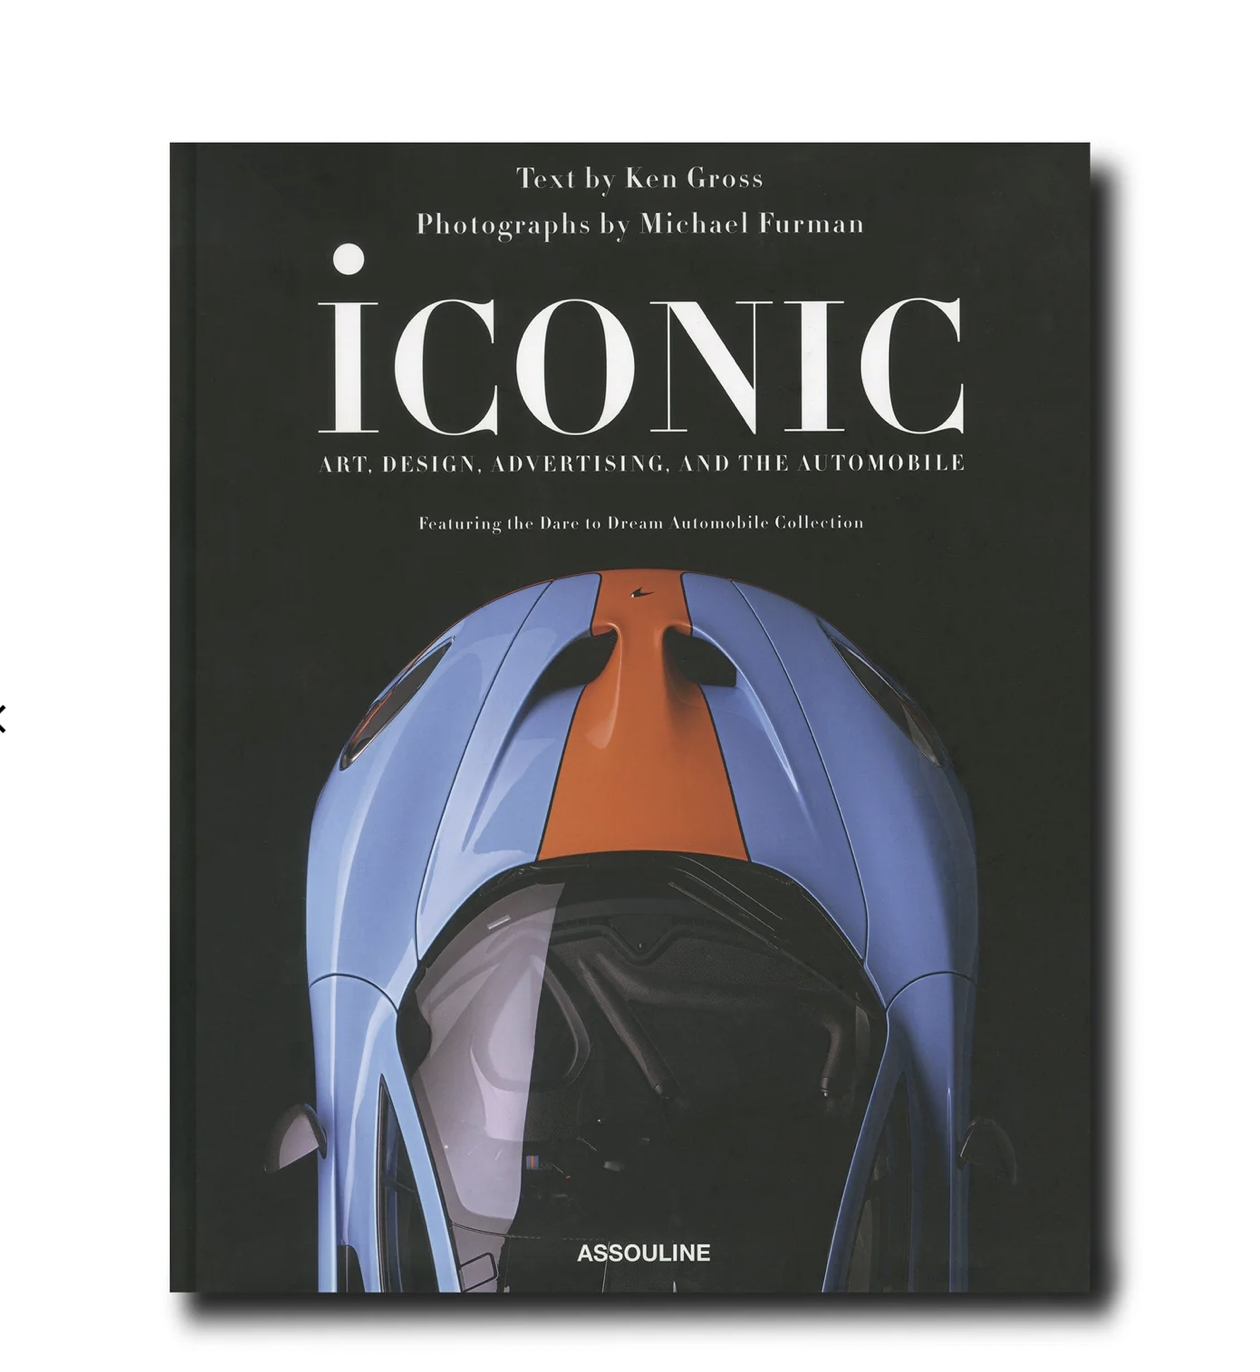 ICONIC: Art, Design, Advertising, and the Automobile